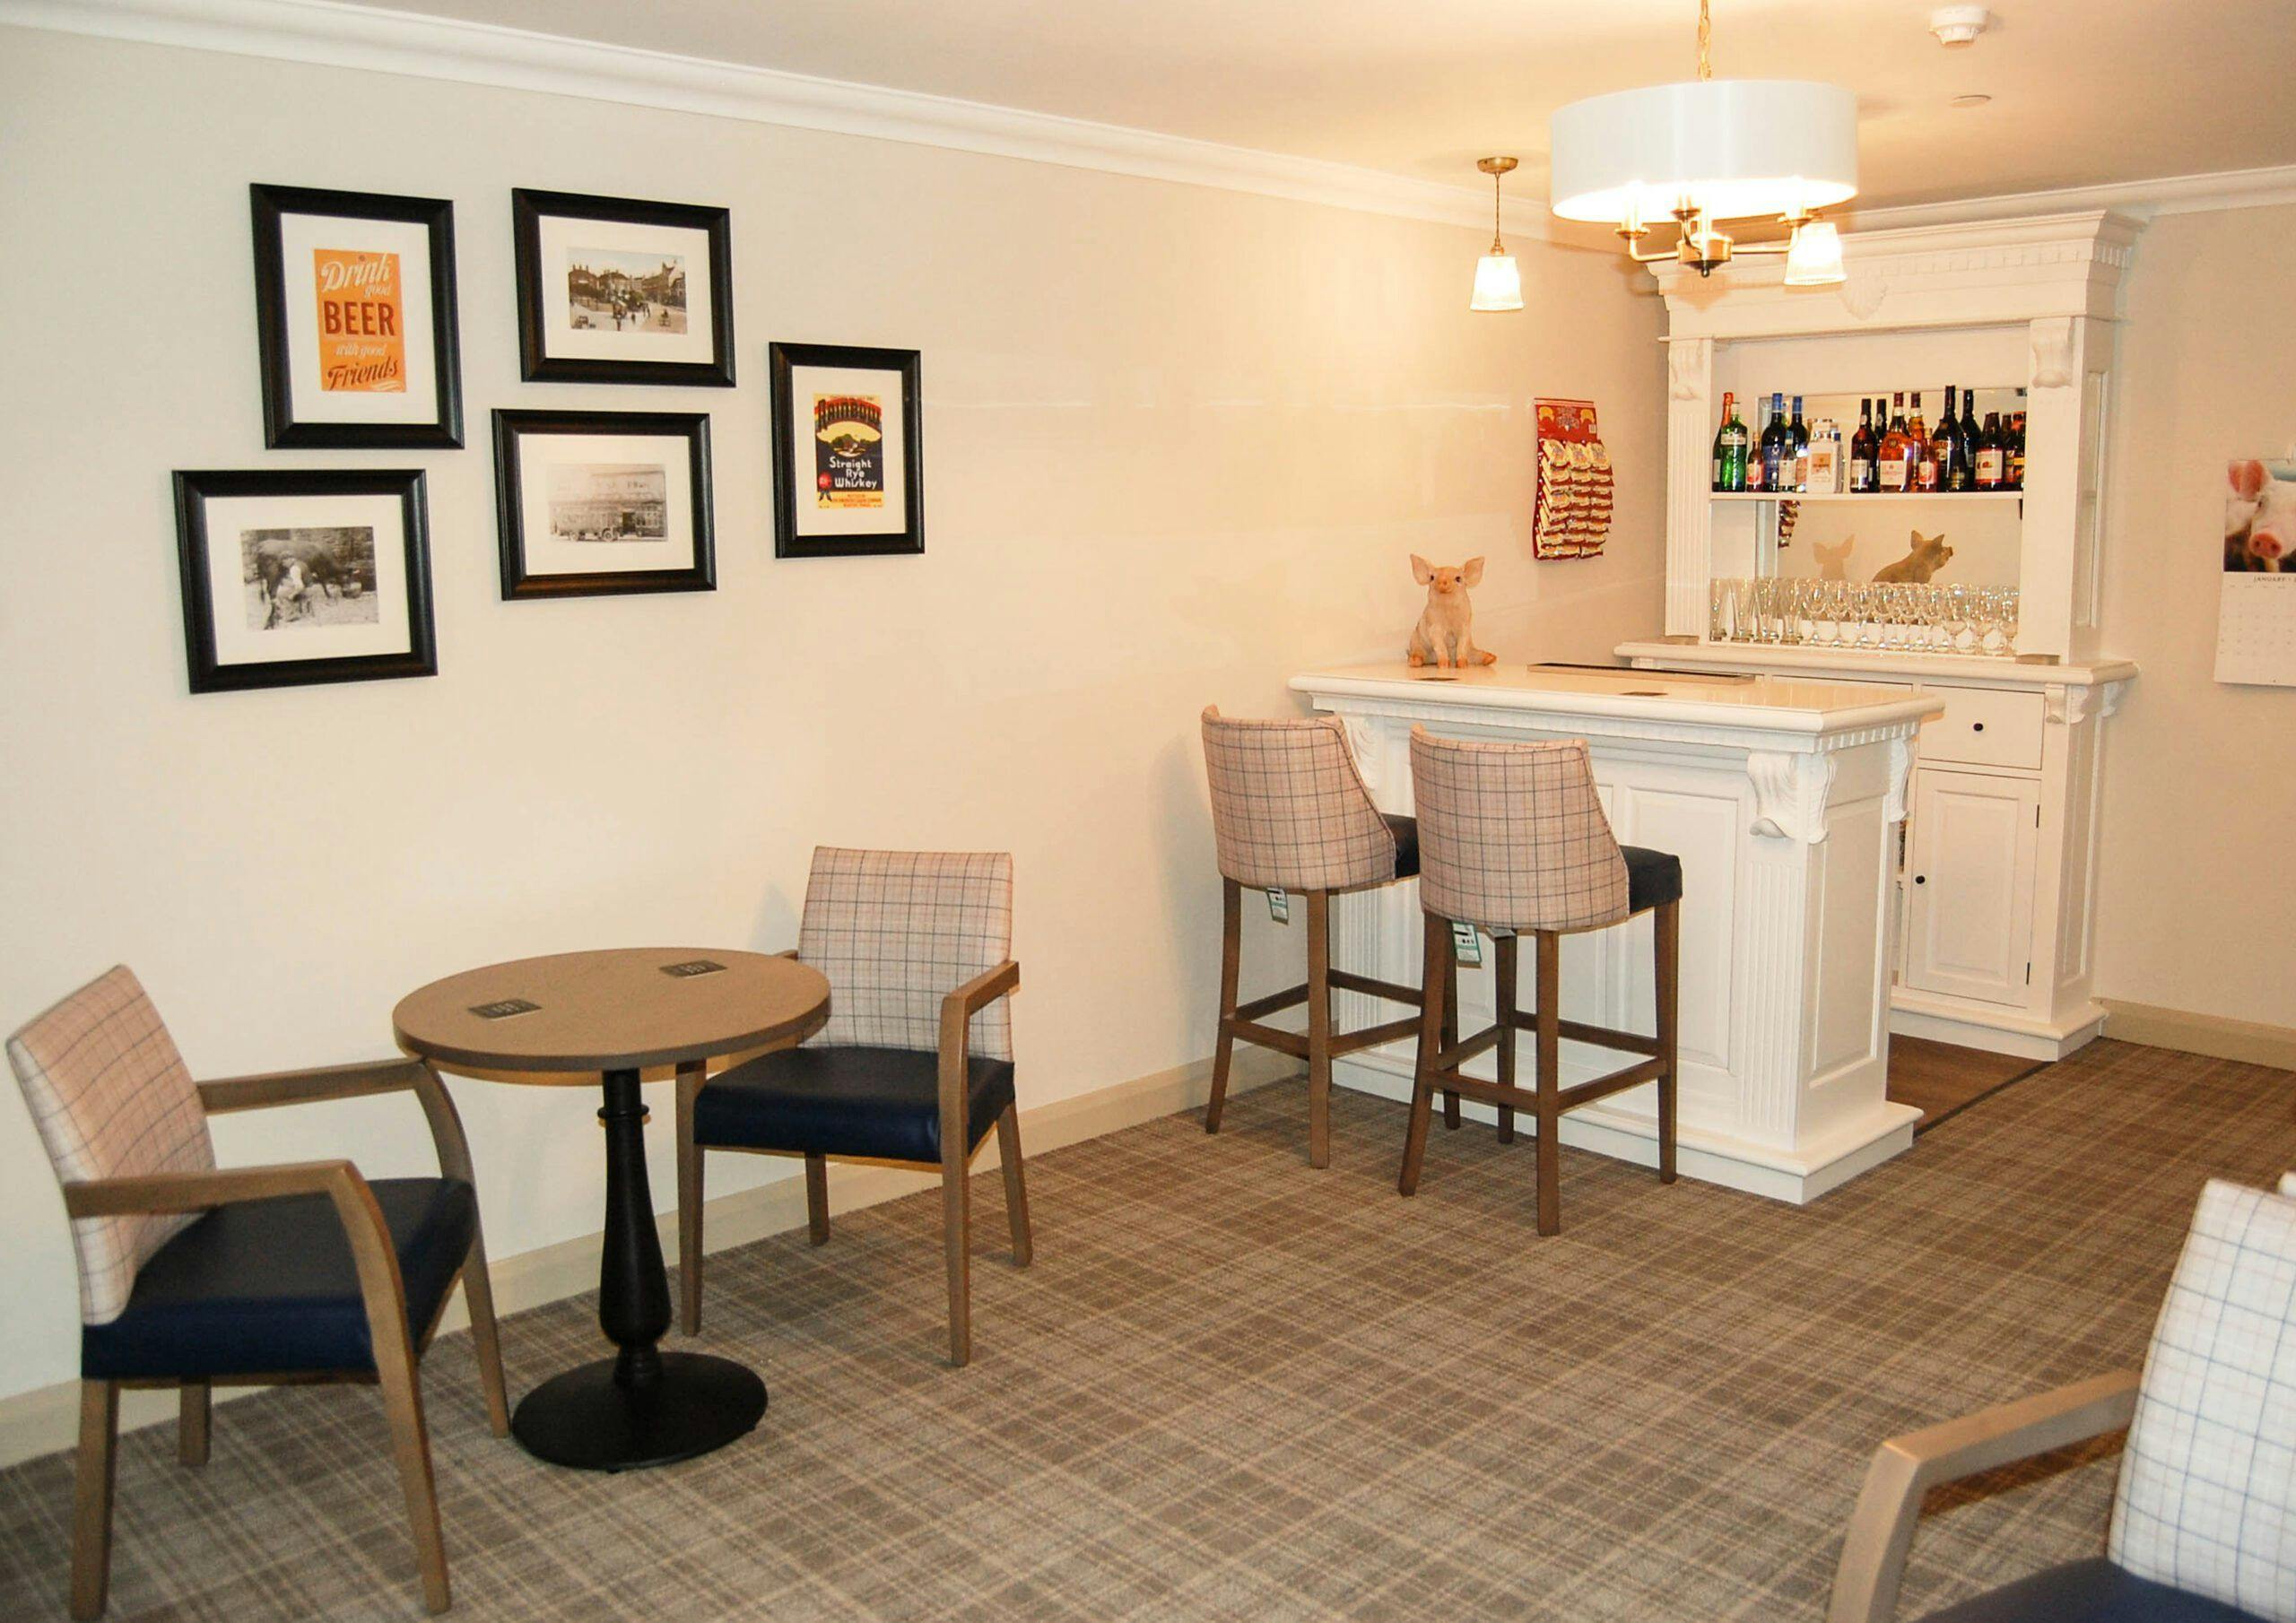 Seating area of Thimbleby Court care home in Horncastle, Lincolnshire